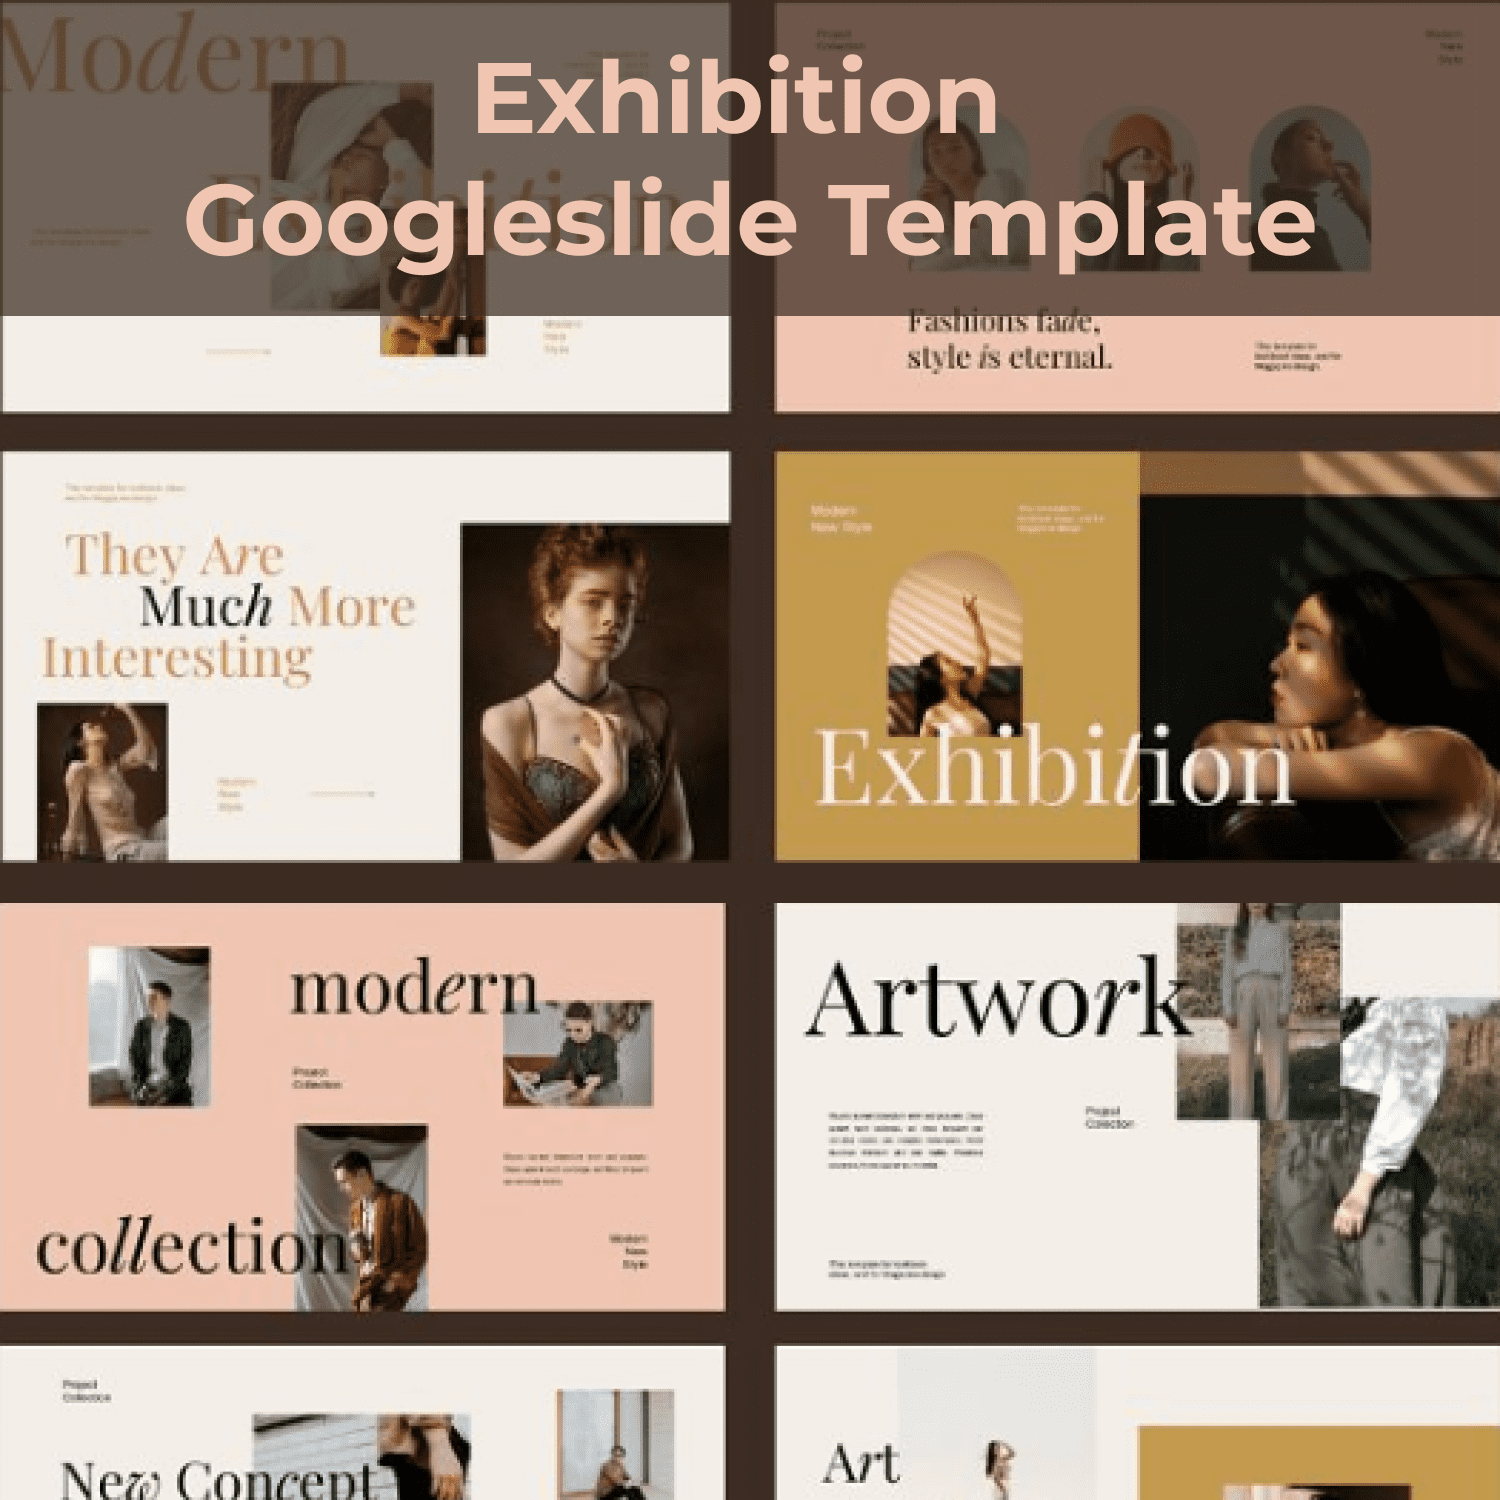 Exhibition Googleslide Template cover image.